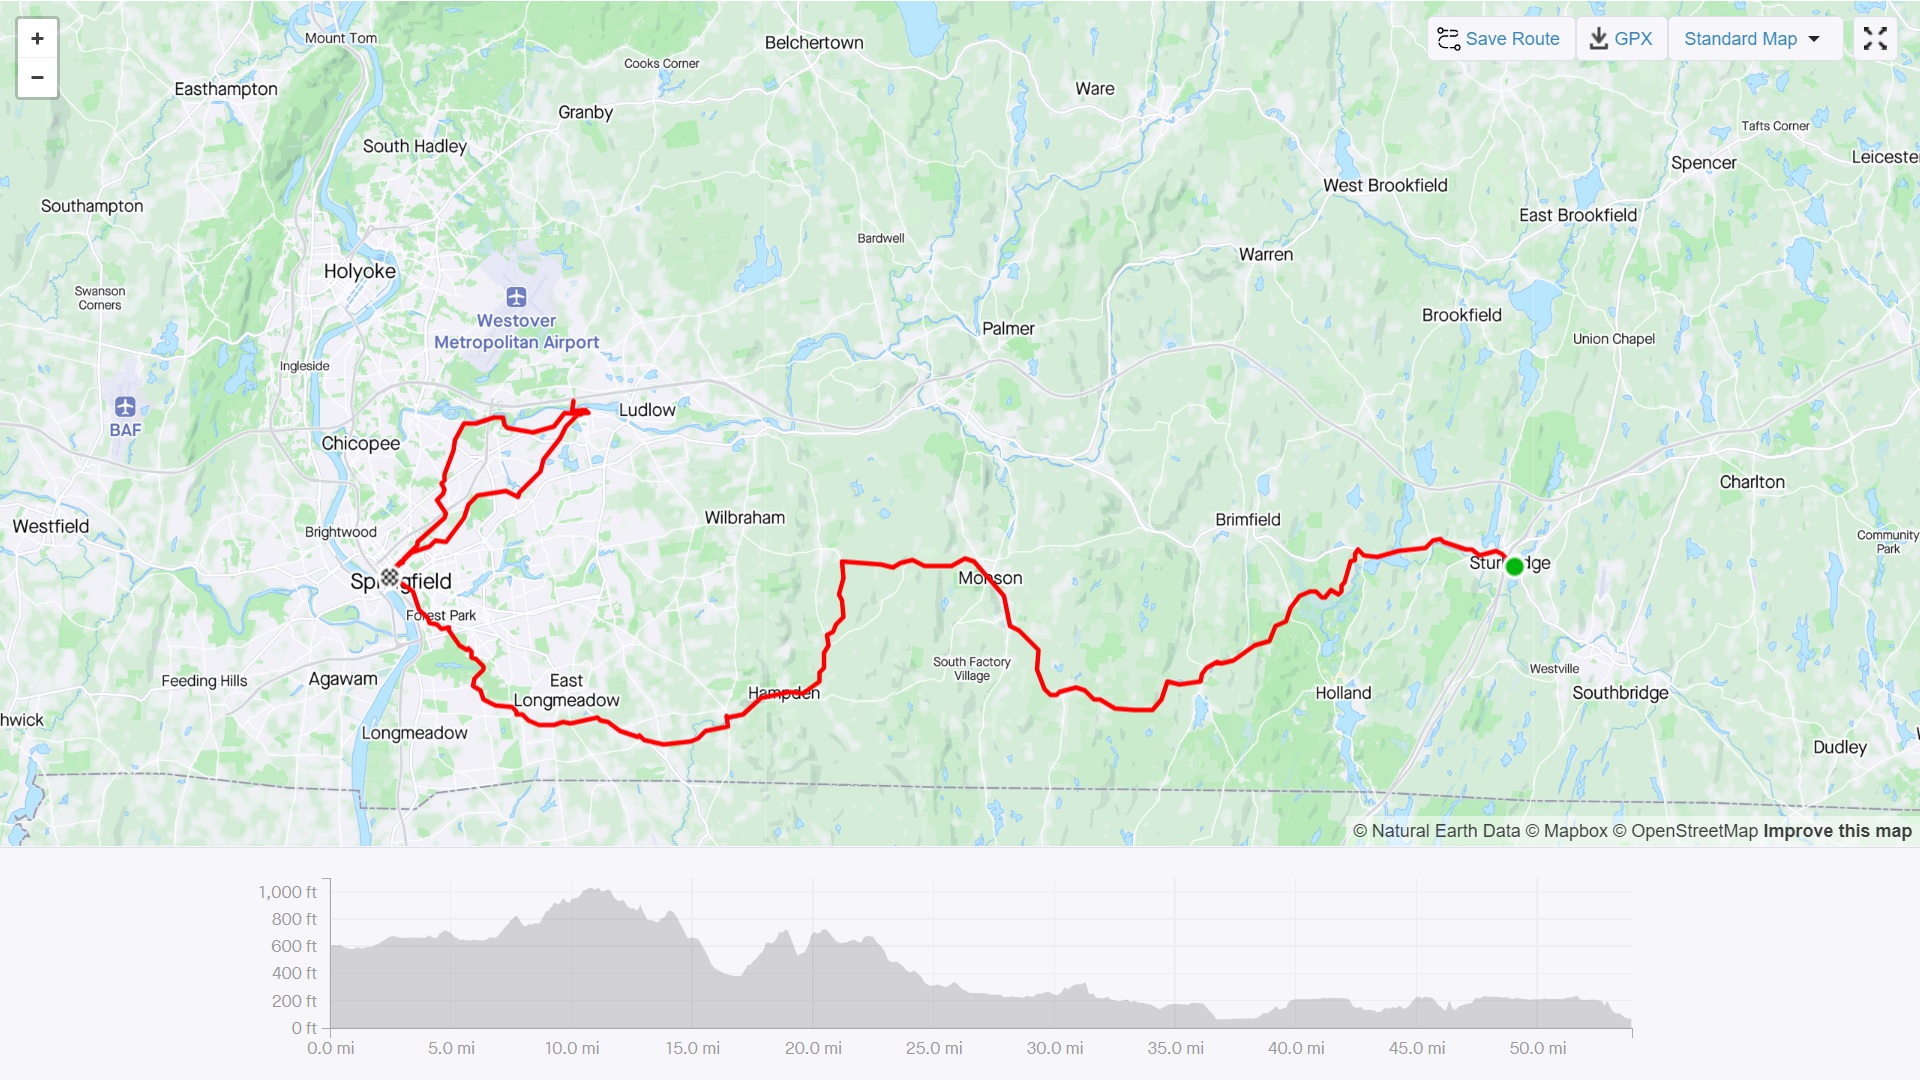 Strava Route Day 2 - Sturbridge to Springfield, and the Ludlow-Chicopee loop